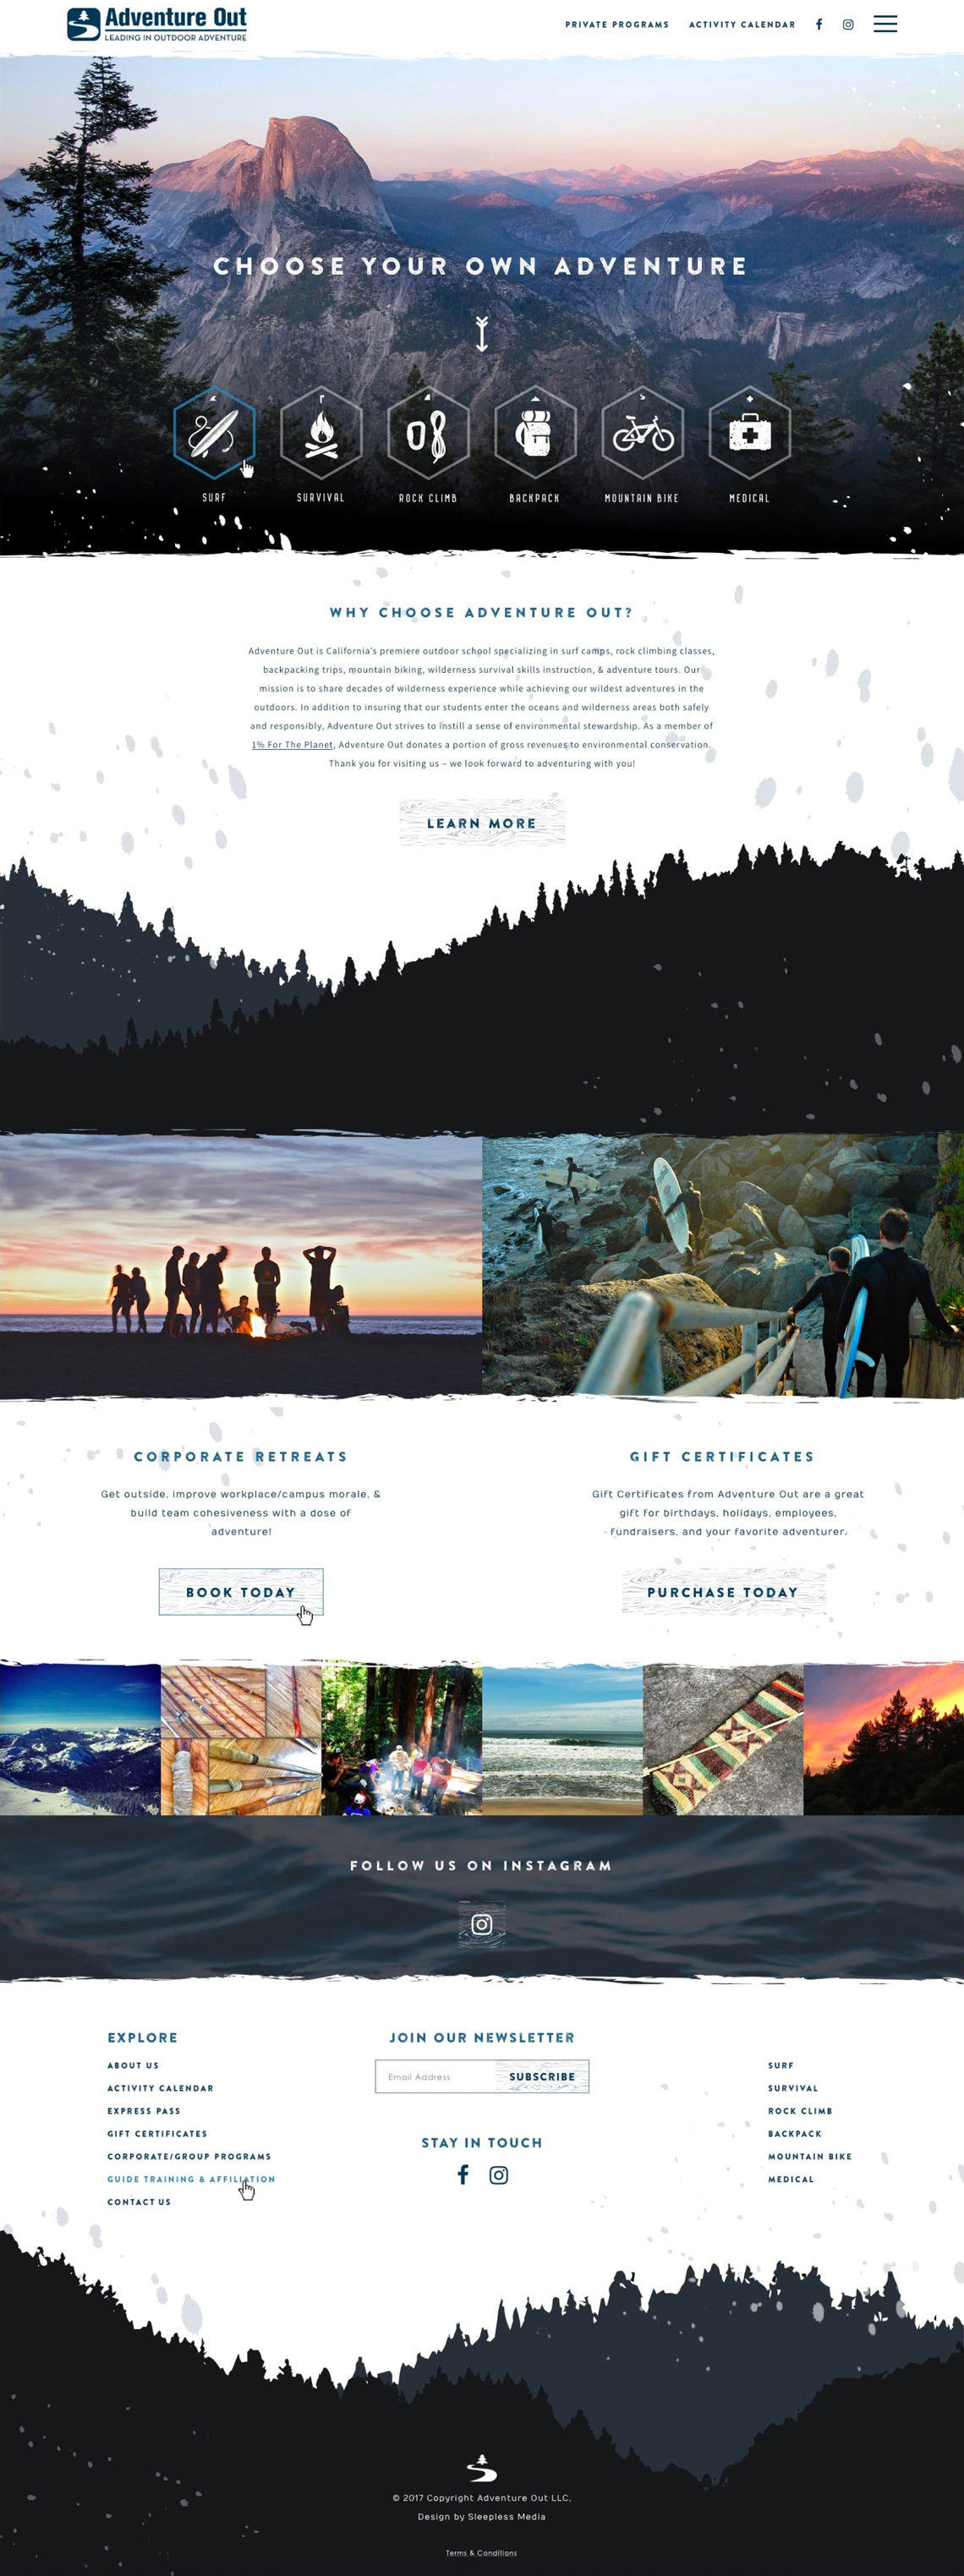 Adventure Out Homepage